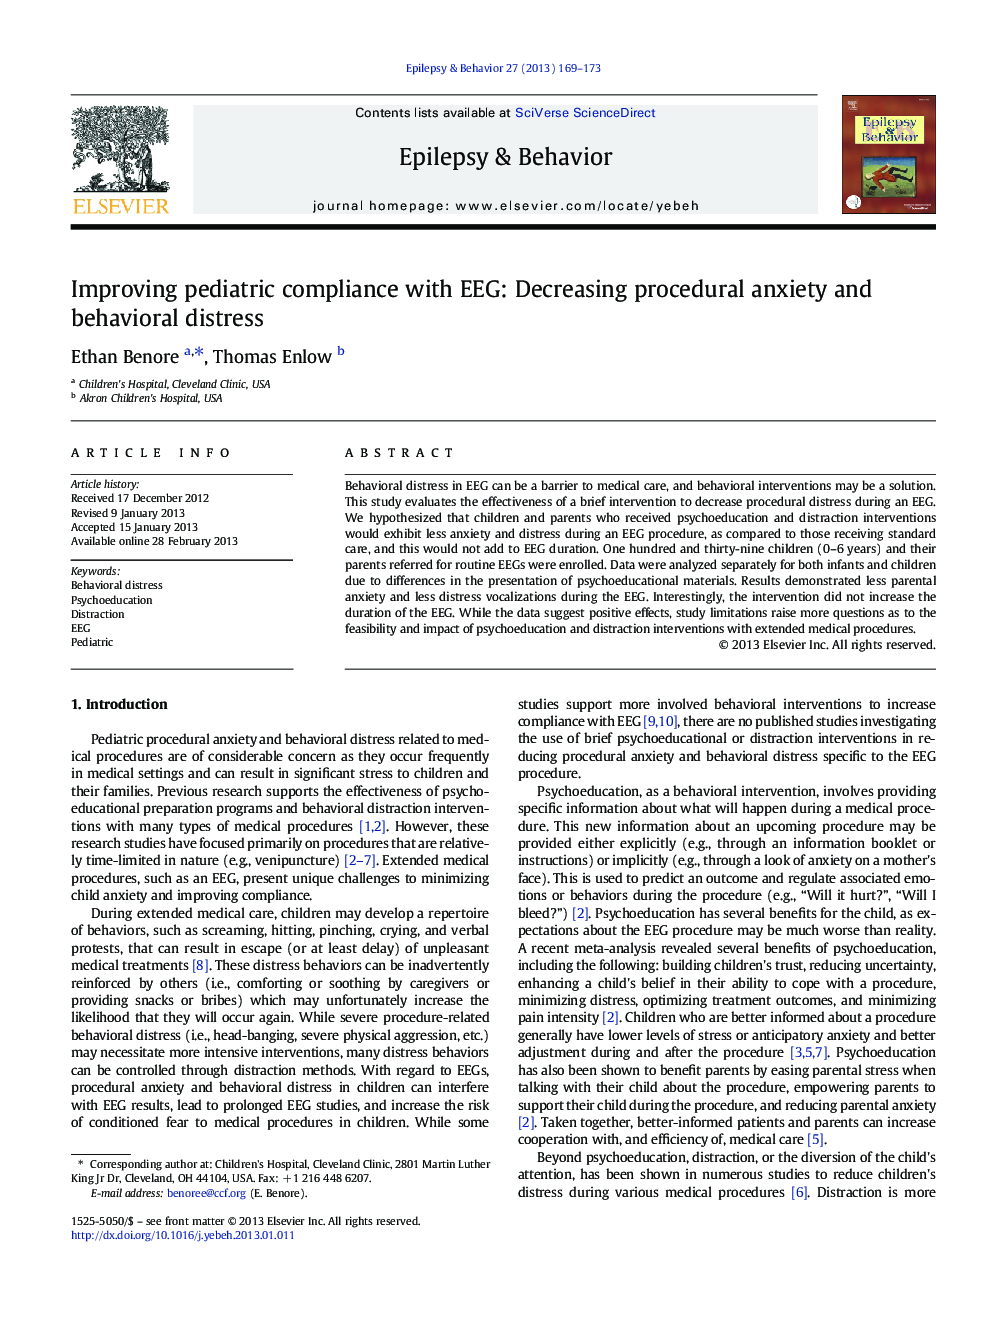 Improving pediatric compliance with EEG: Decreasing procedural anxiety and behavioral distress